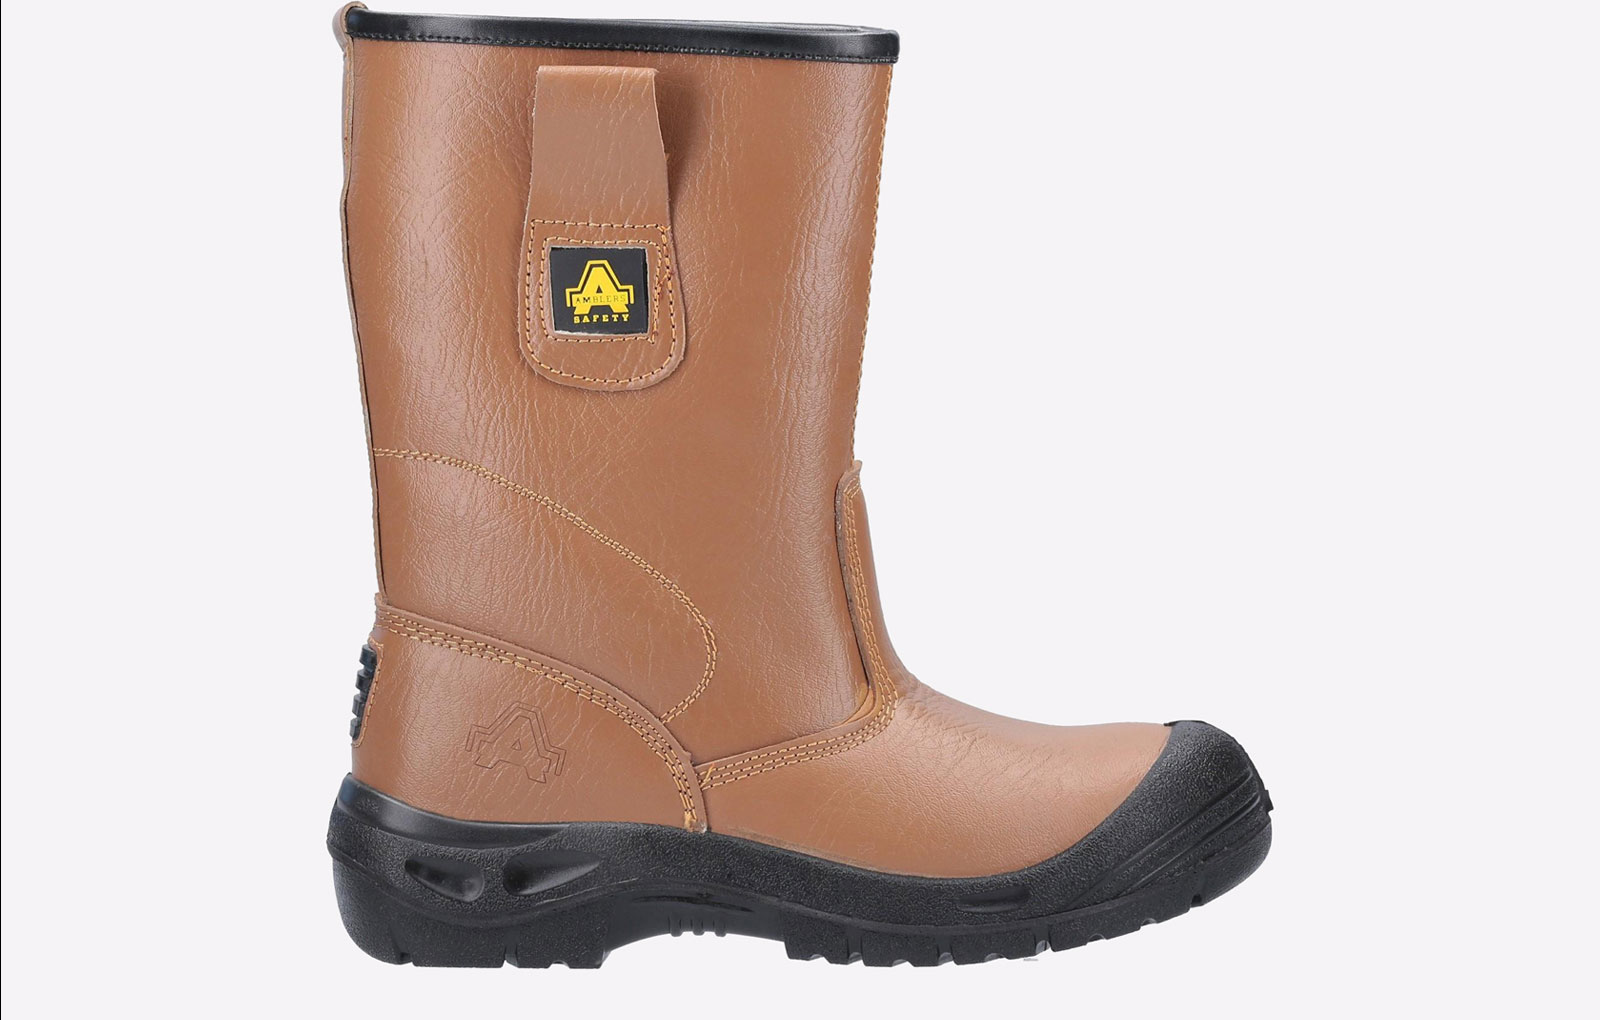 Amblers FS142 Water Resistant Safety Boot Mens - GRD-20427-32270-13